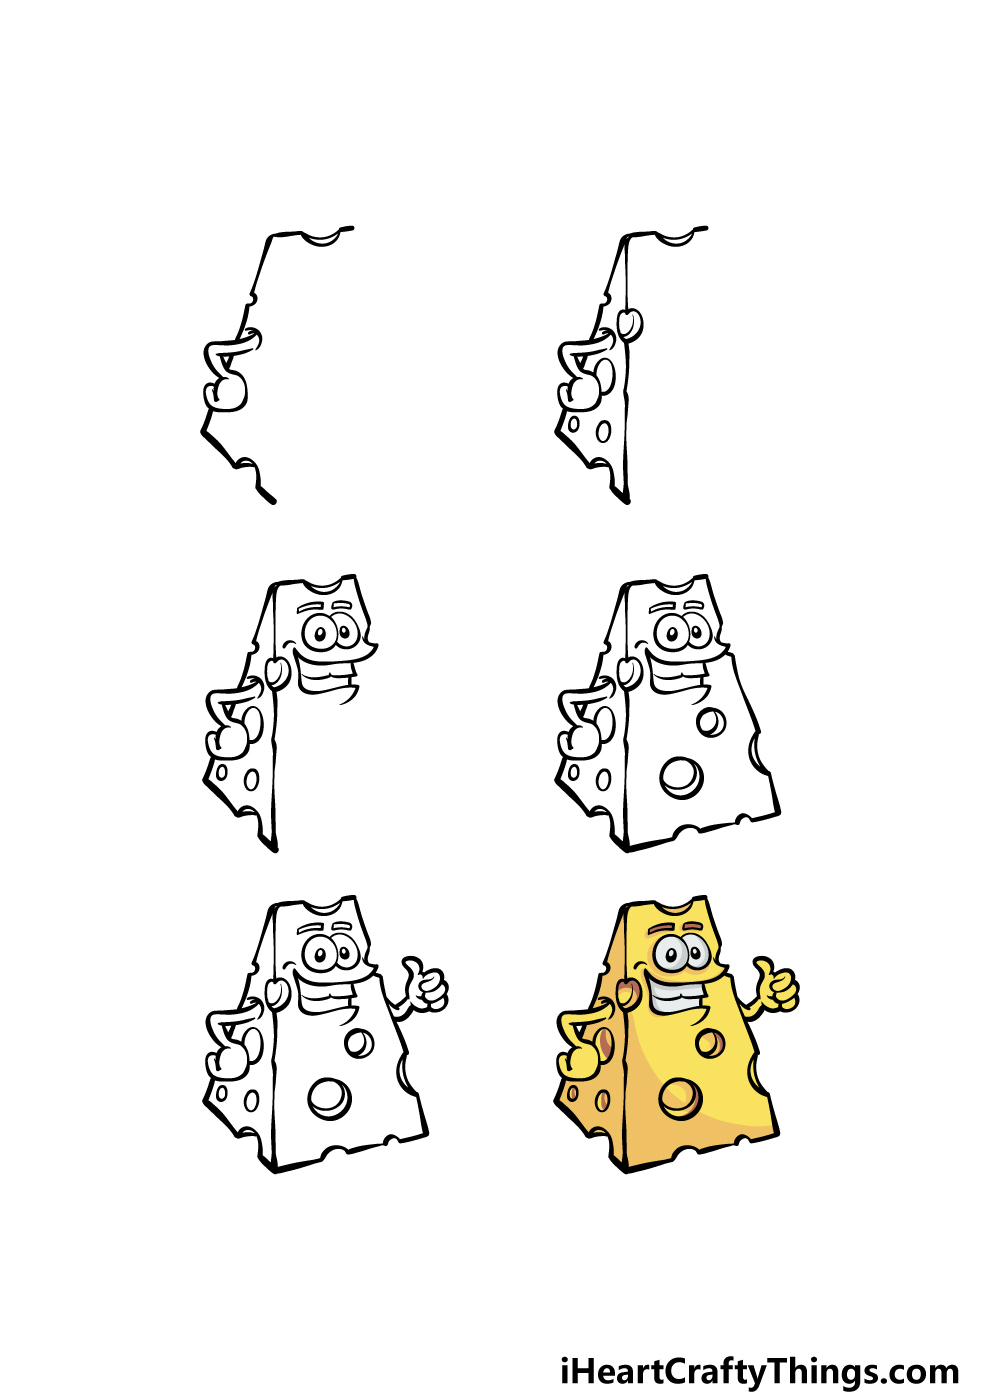 how to draw a cartoon cheese in 6 steps